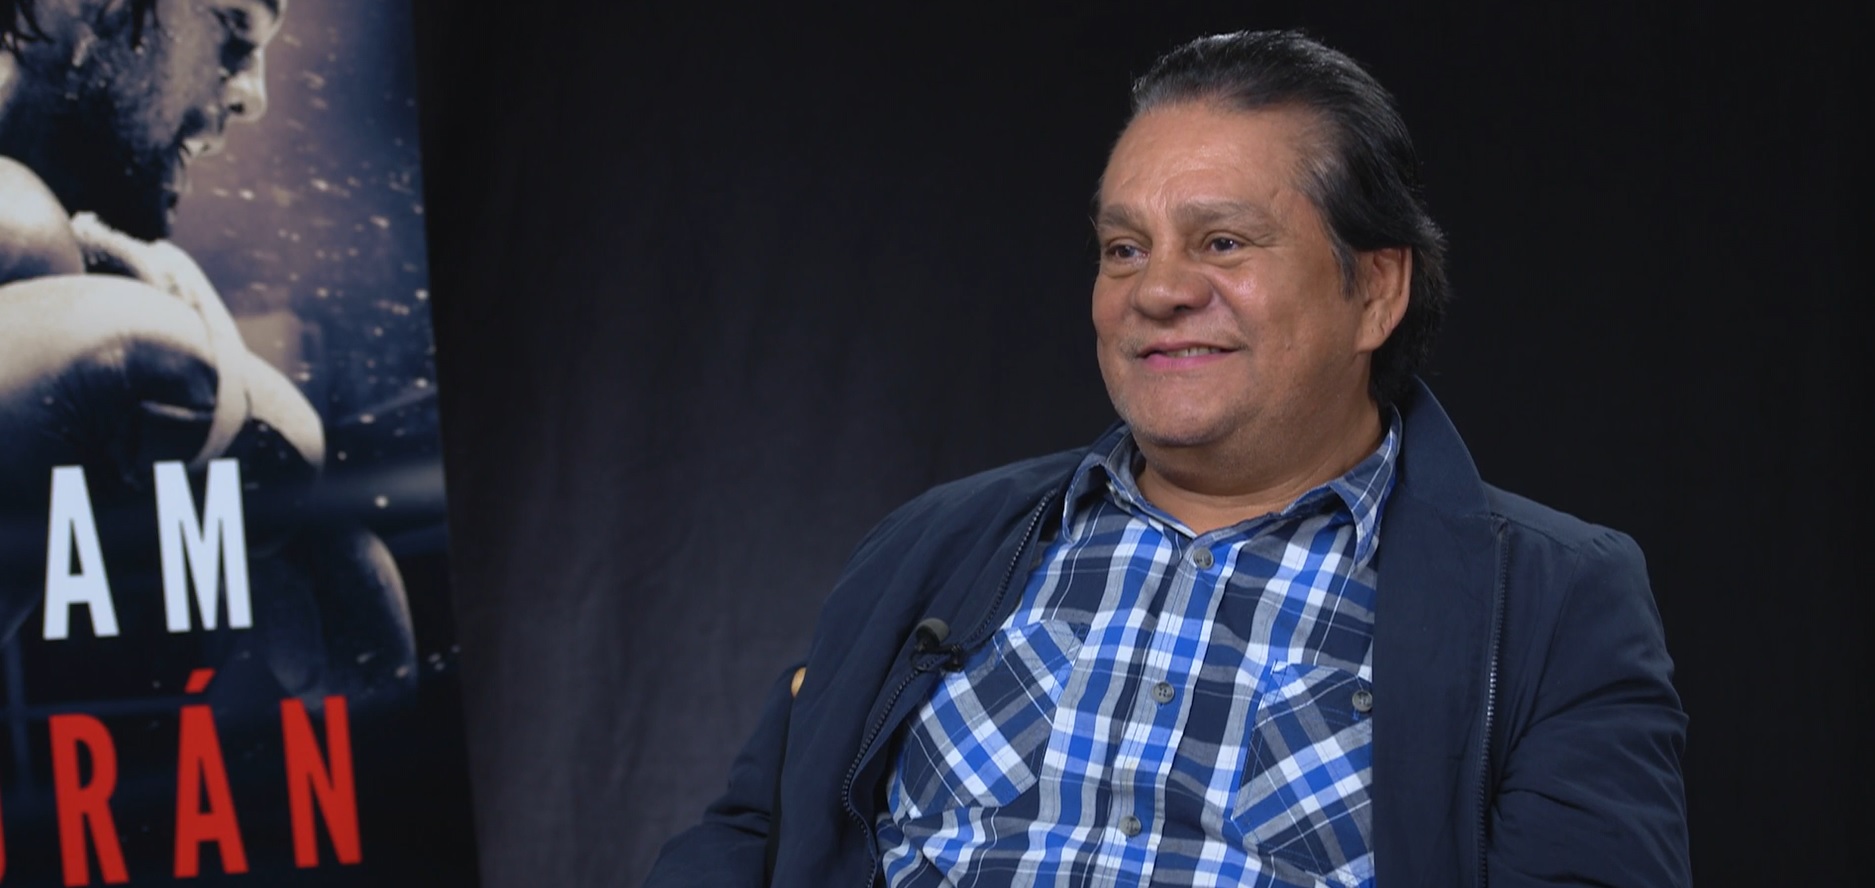 I Am Durán: Roberto Durán Reflects On Life and Boxing Career [Exclusive Interview]